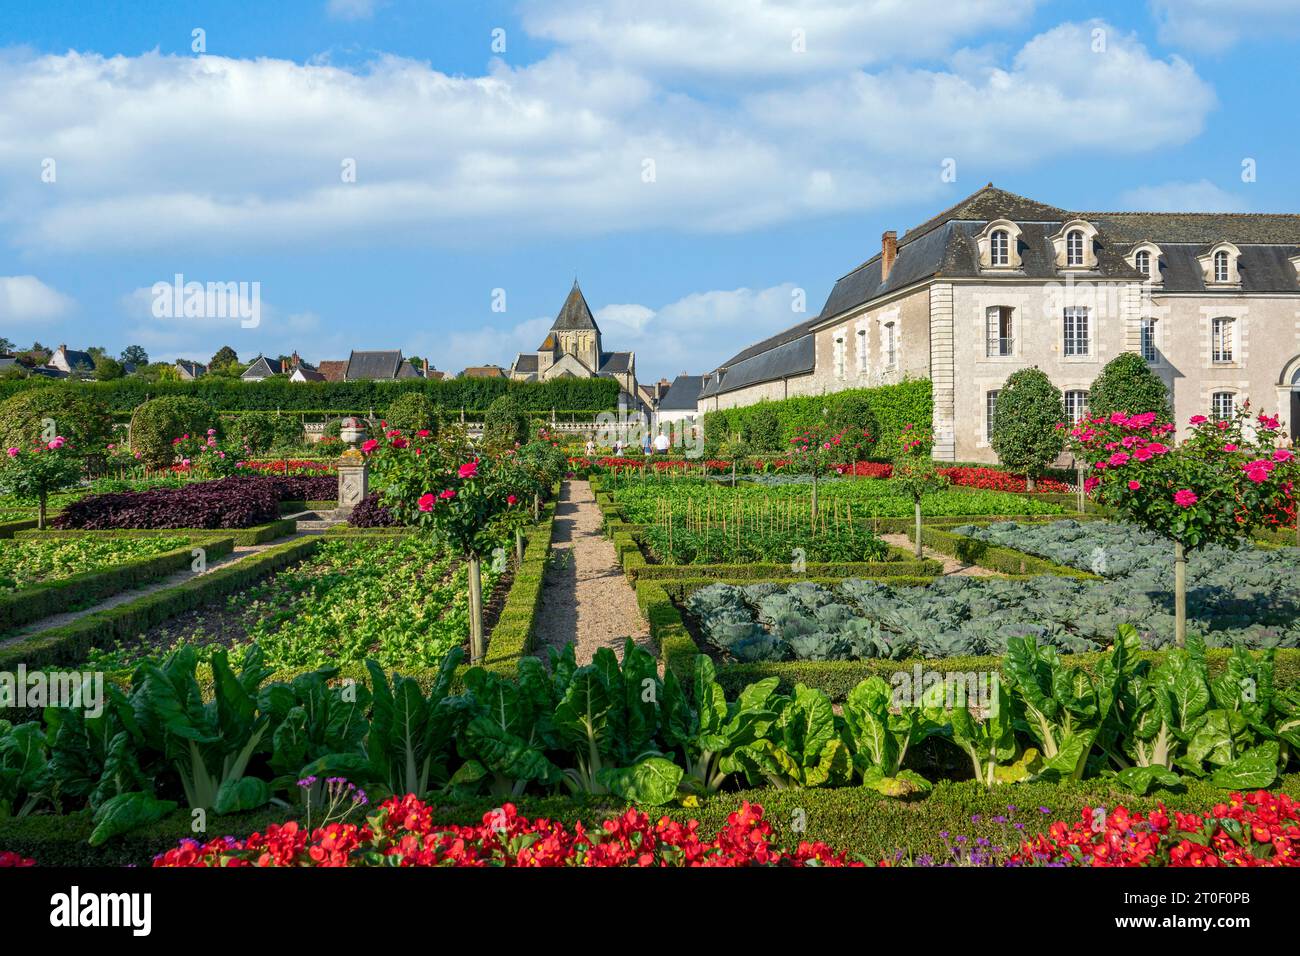 Villandry Castle is located about 17 km west of the city of Tours. Villandry Castle is most famous for its gardens. The eponymous village of Villandry is located on the Cher River and is the last commune before its confluence with the Loire River. Stock Photo